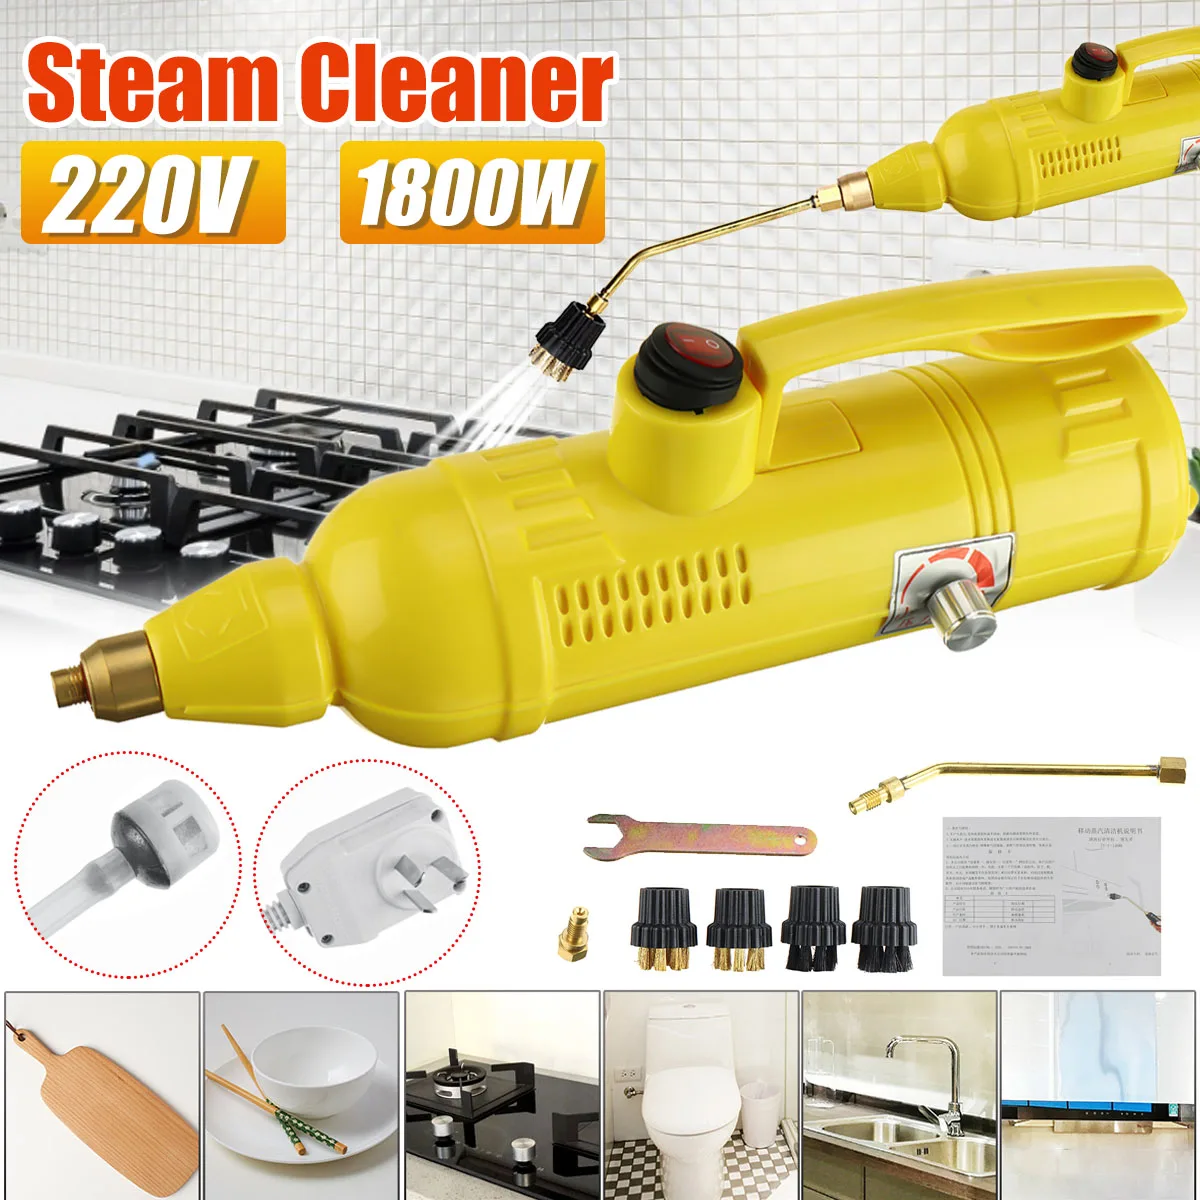 

High Pressure Steam Cleaner High Temperature Air Conditioning Range Hood Steaming Cleaning Machine Sterilization Disinfection